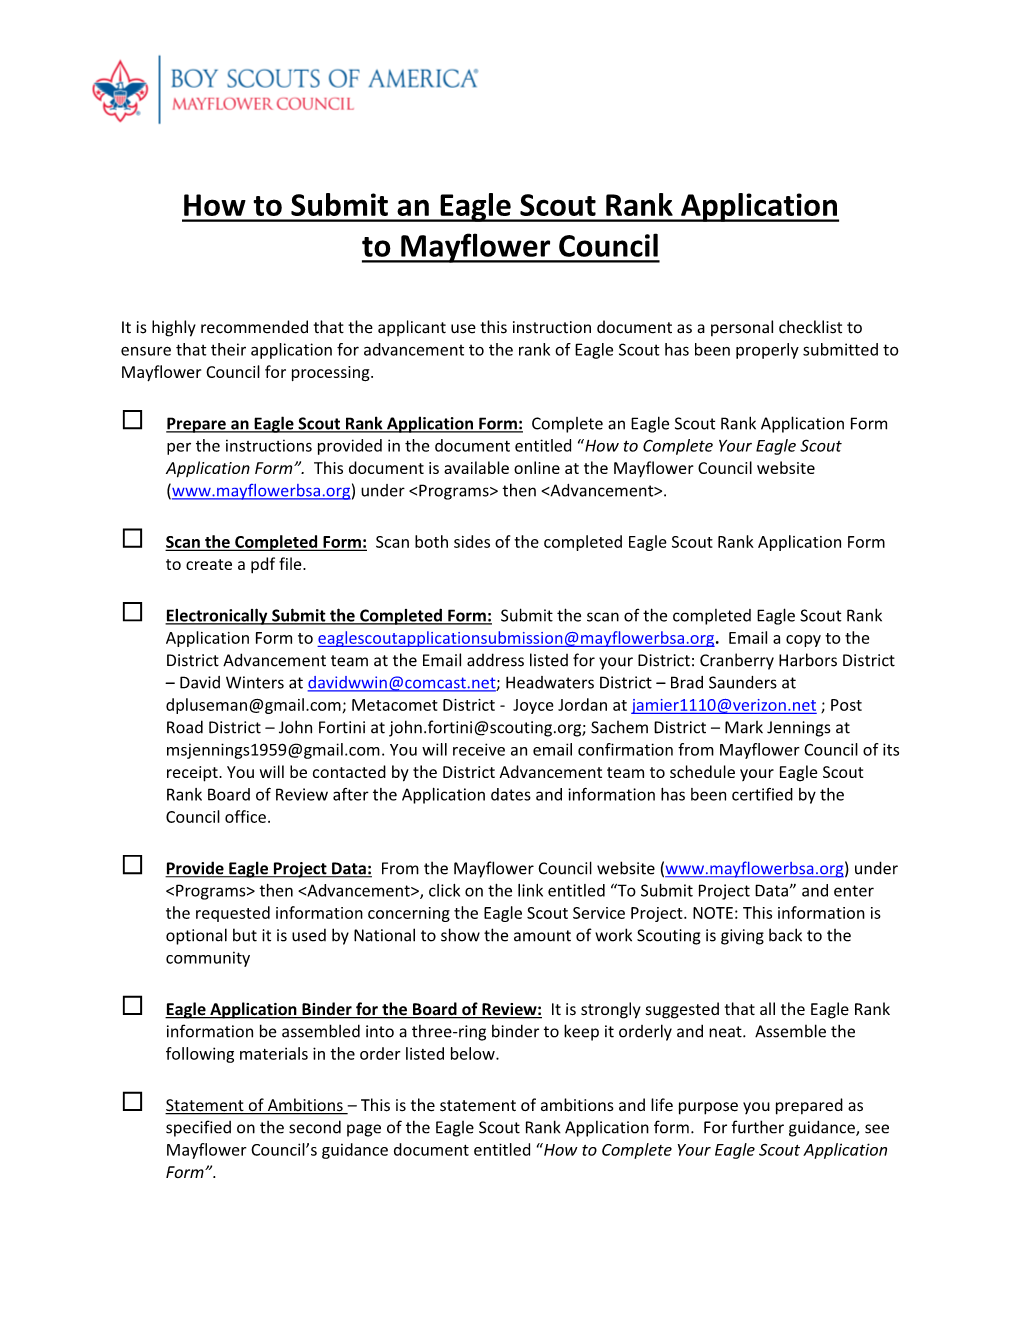 How to Submit an Eagle Scout Rank Application to Mayflower Council